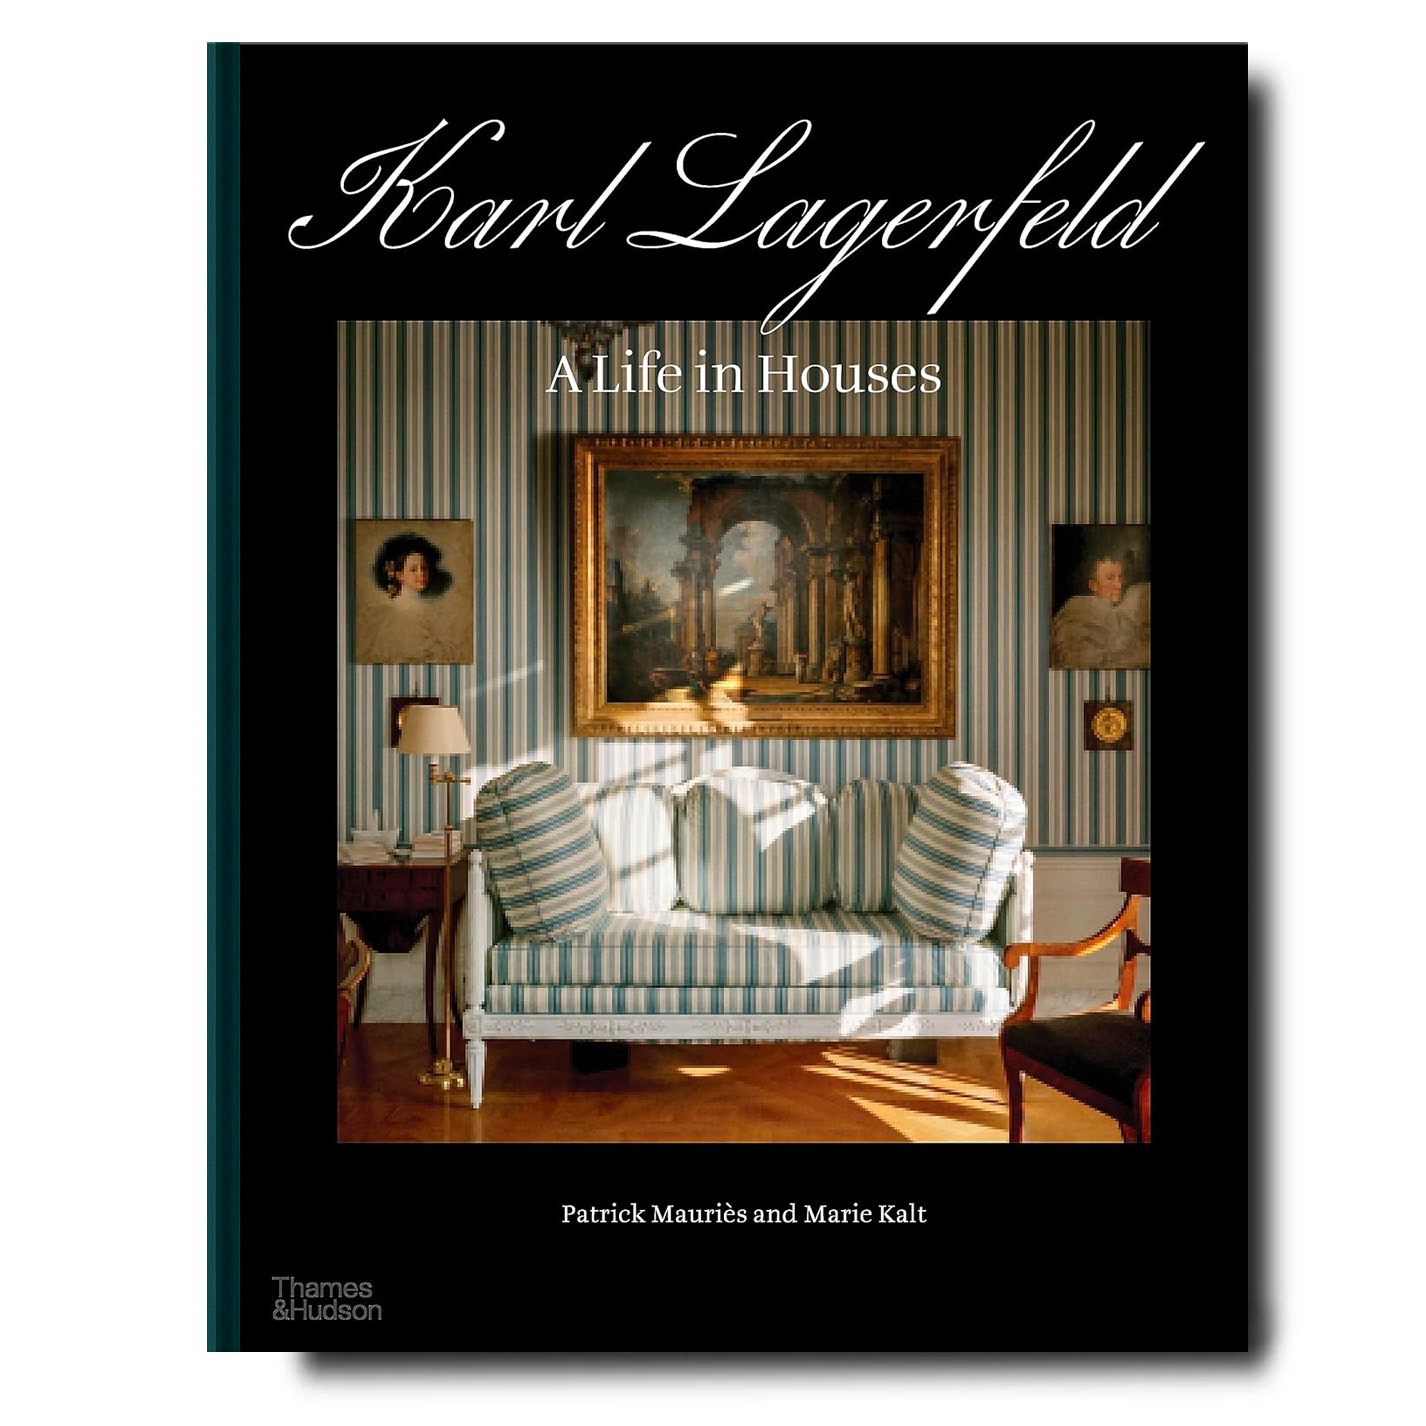 "Karl Lagerfeld: A Life in Houses" Book